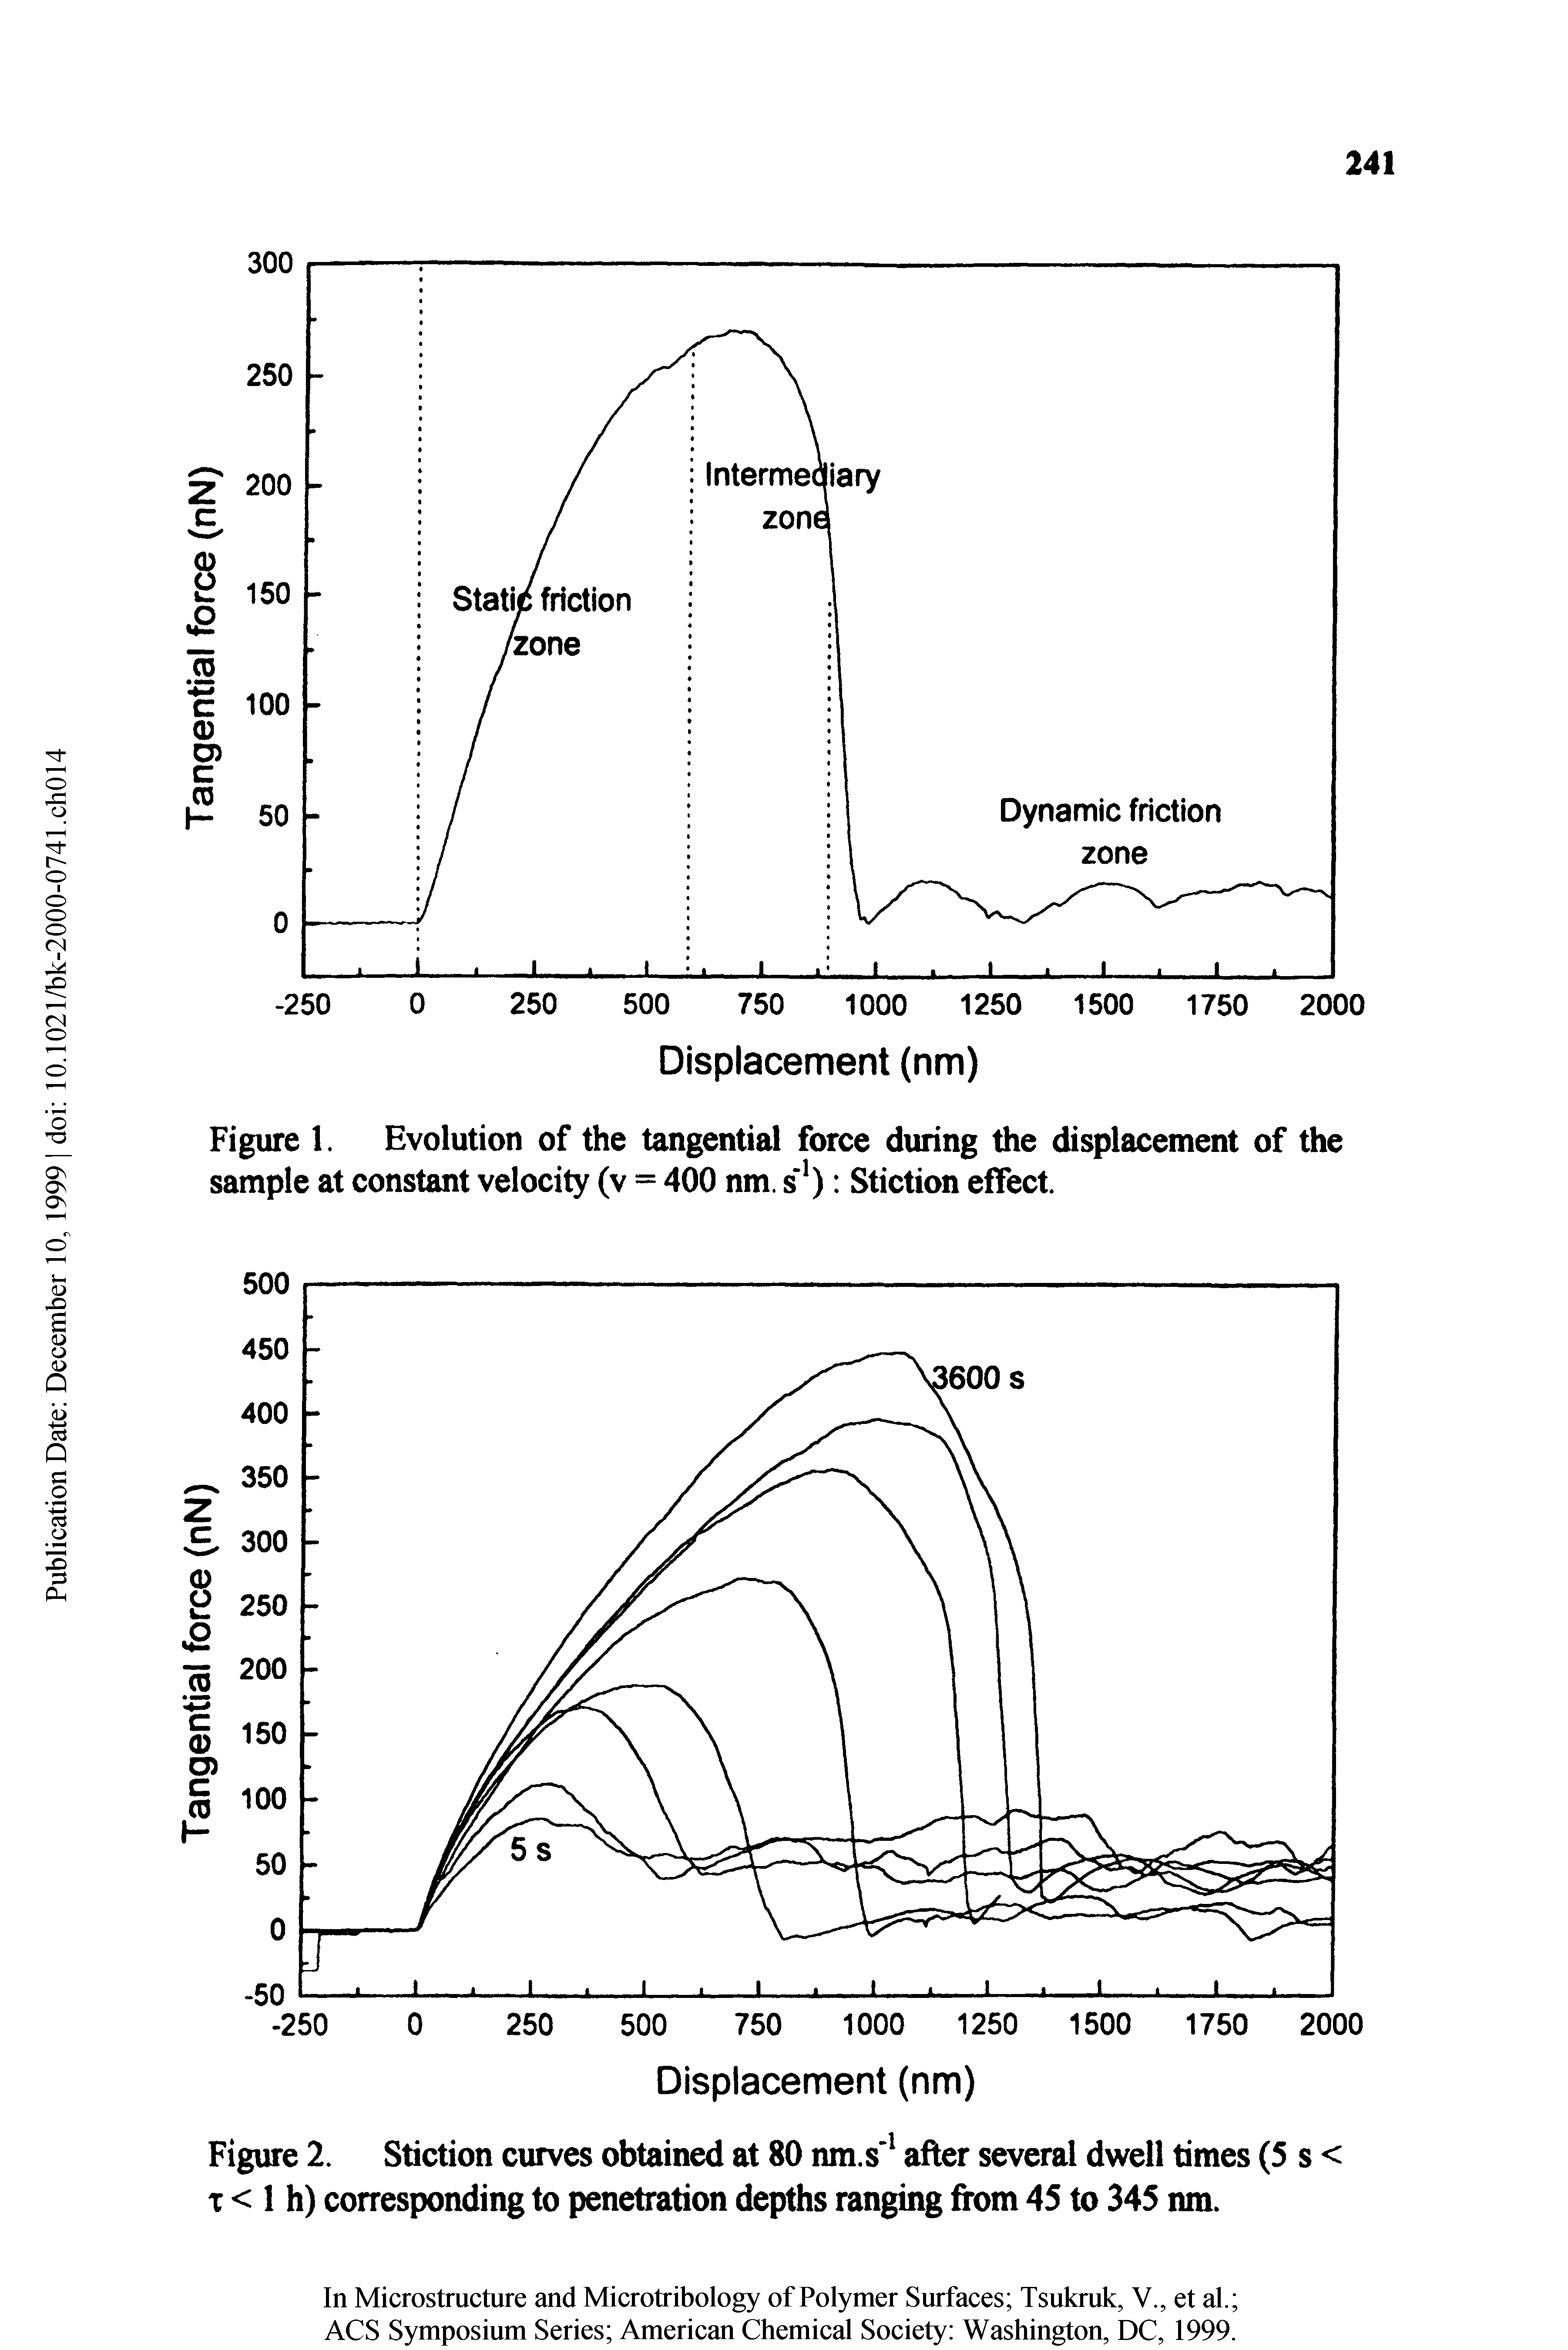 Figure 1. Evolution of the tangential force during the displacement of the sample at constant velocity (v = 400 nm. s ) Stiction effect.